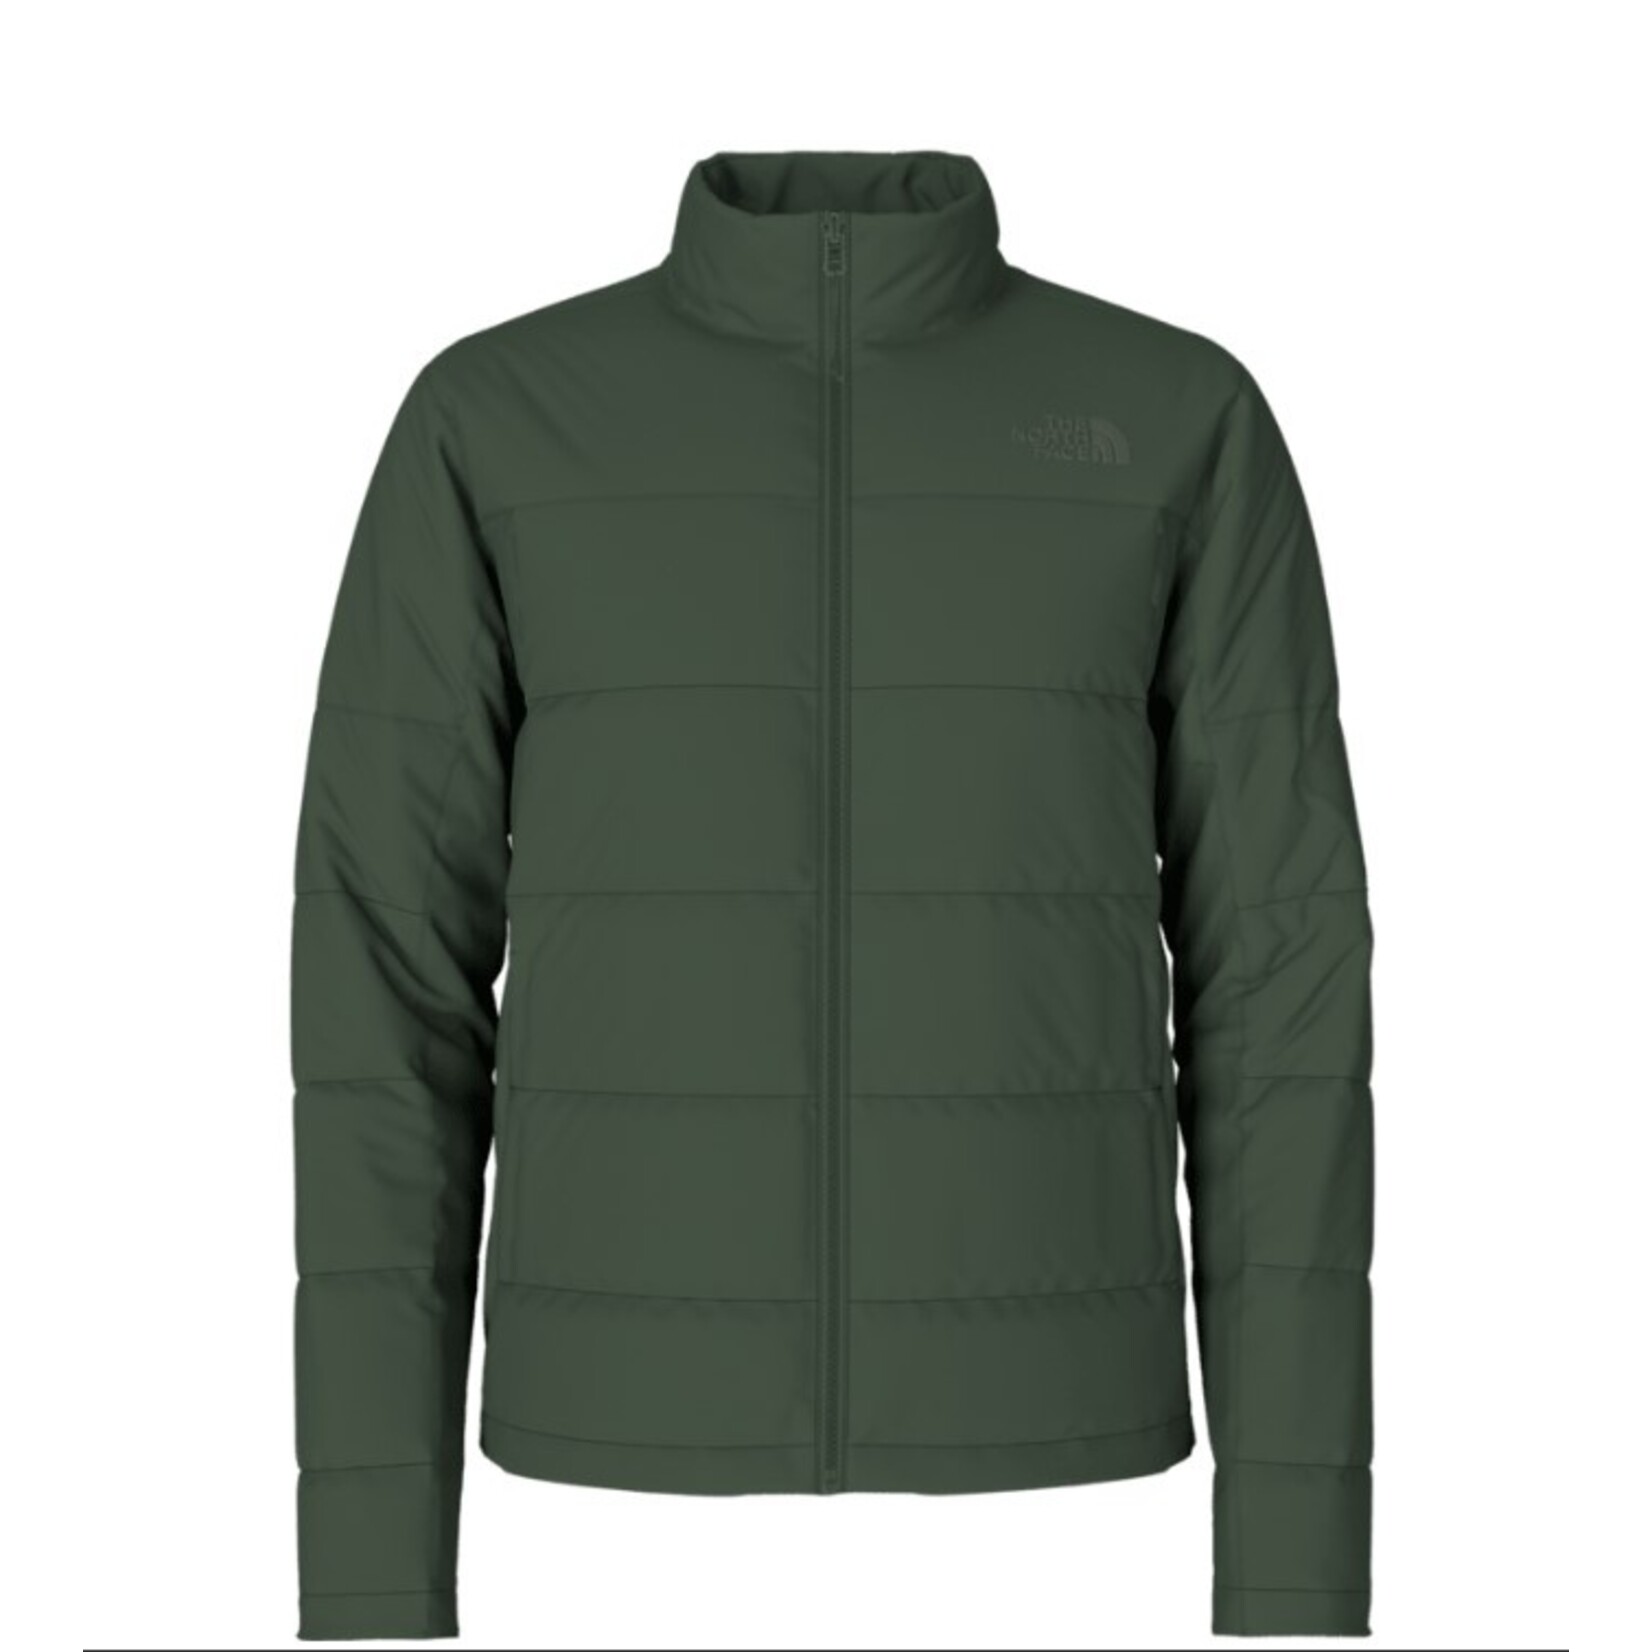 THE NORTH FACE Men's Clement Triclimate® Jacket